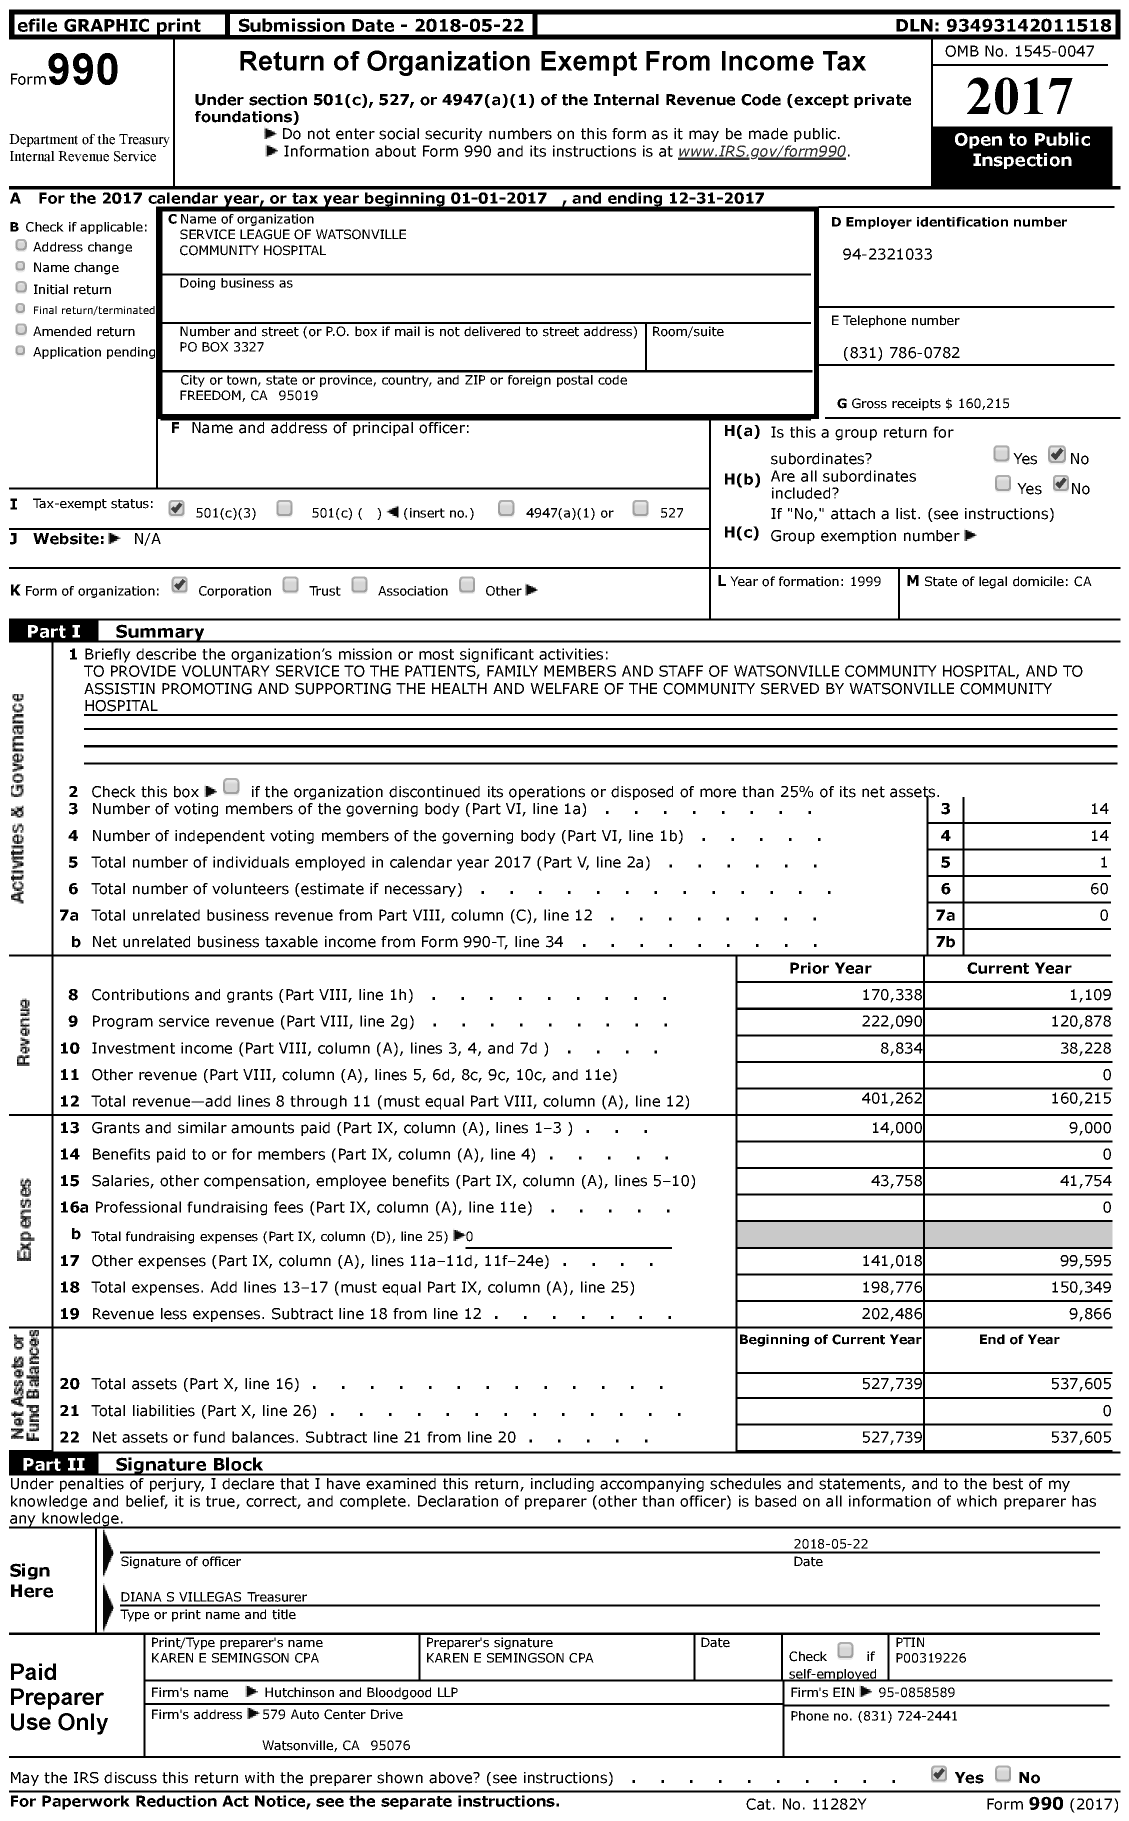 Image of first page of 2017 Form 990 for Service League of Watsonville Community Hospital